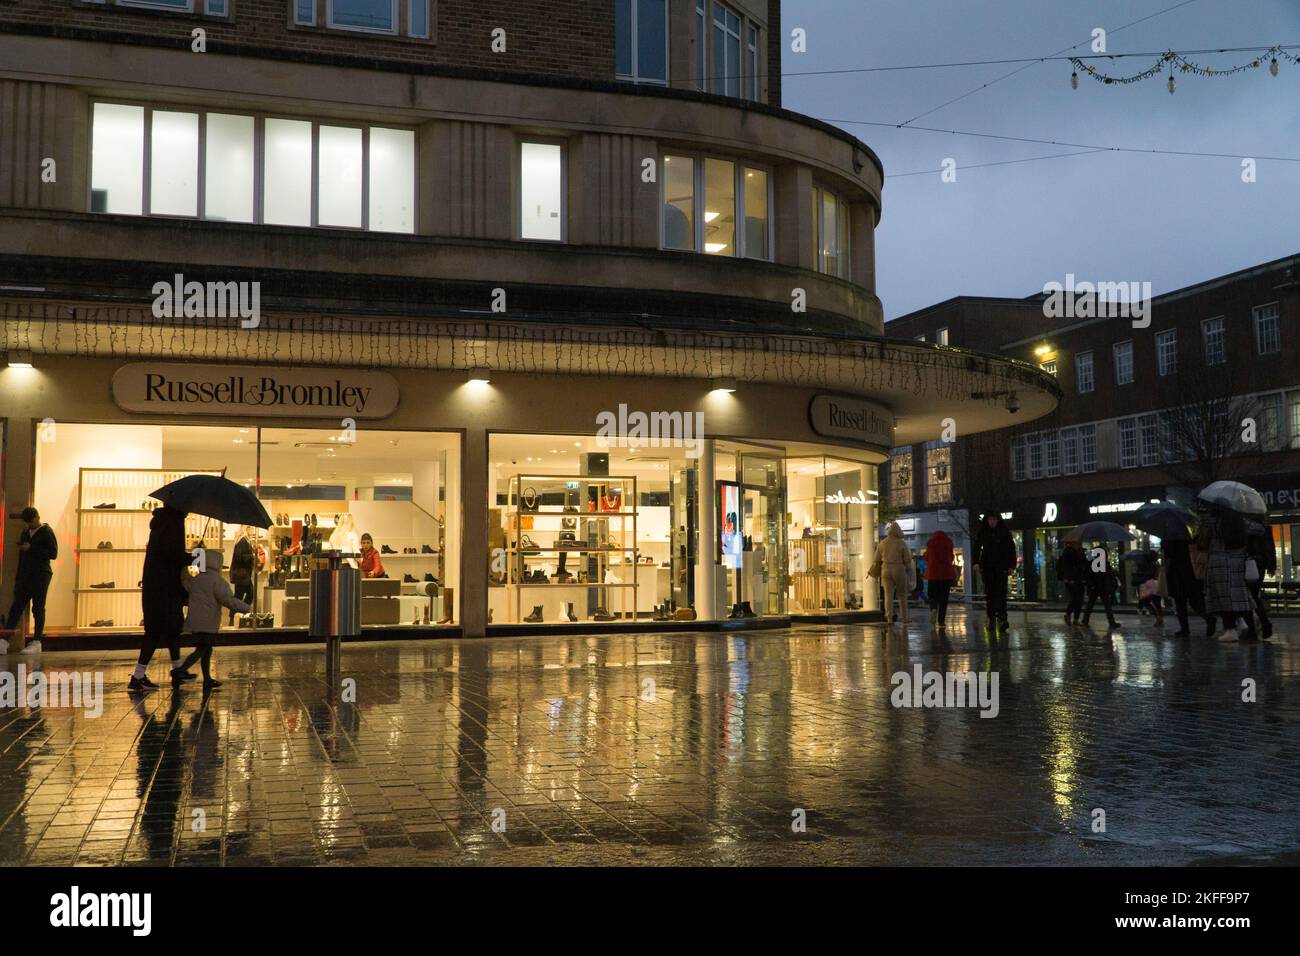 Exeter, UK, 16 November 2022: at dusk shop windows cast bright reflections across the pavements in Exeter as a band of heavy rainfall crossed the UK. Many shops are offering discounts for Black Friday and retailers are concerned that high inflation, the recession and the cost of living crisis will created a difficult trading environment for the retail sector. Anna Watson/Alamy Live News Stock Photo